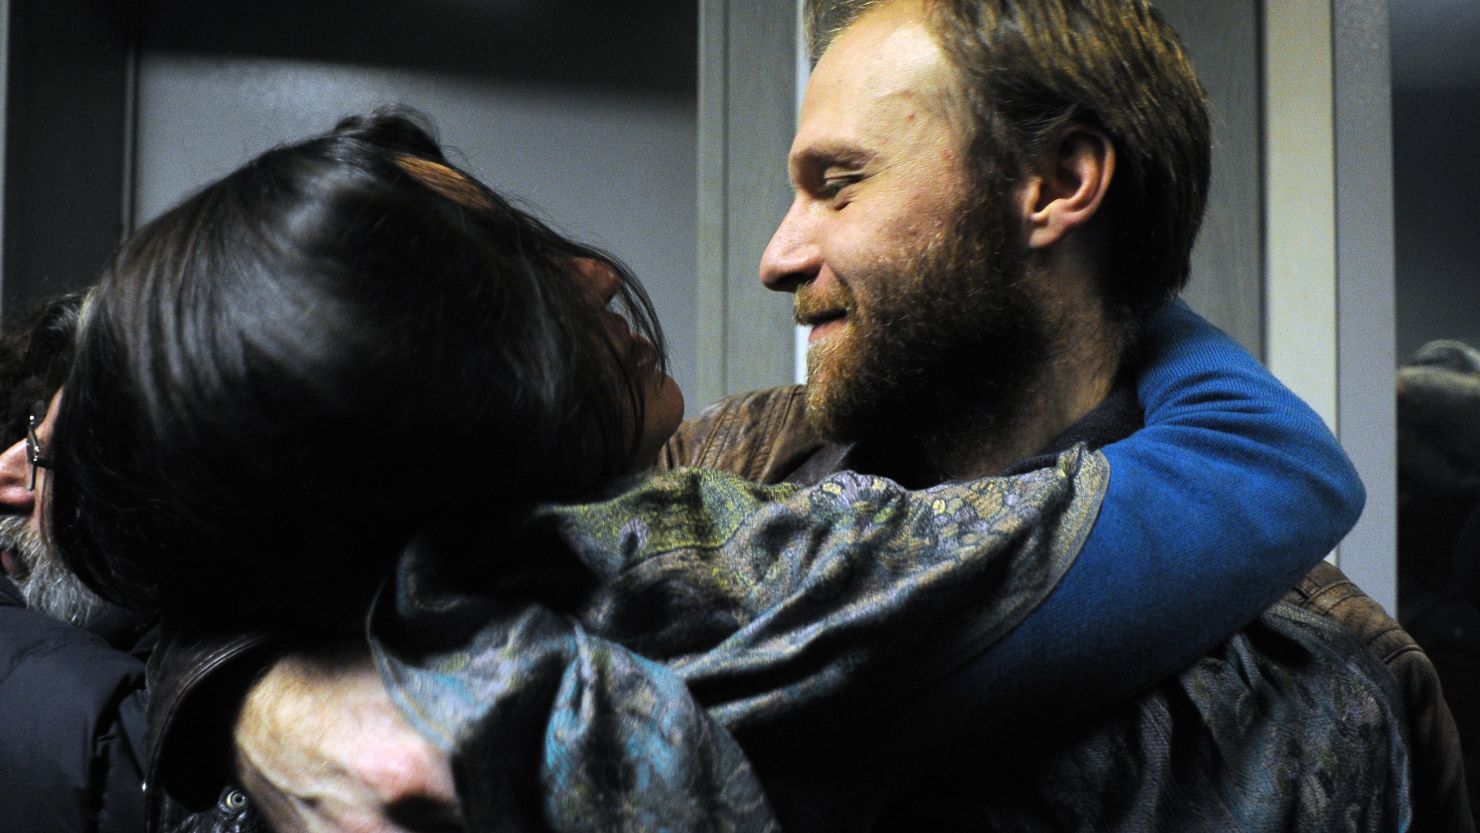 Photographer Denis Sinyakov, one of the 'Arctic 30,' hugs his wife Alina as he is released on bail on November 21 in Russia.